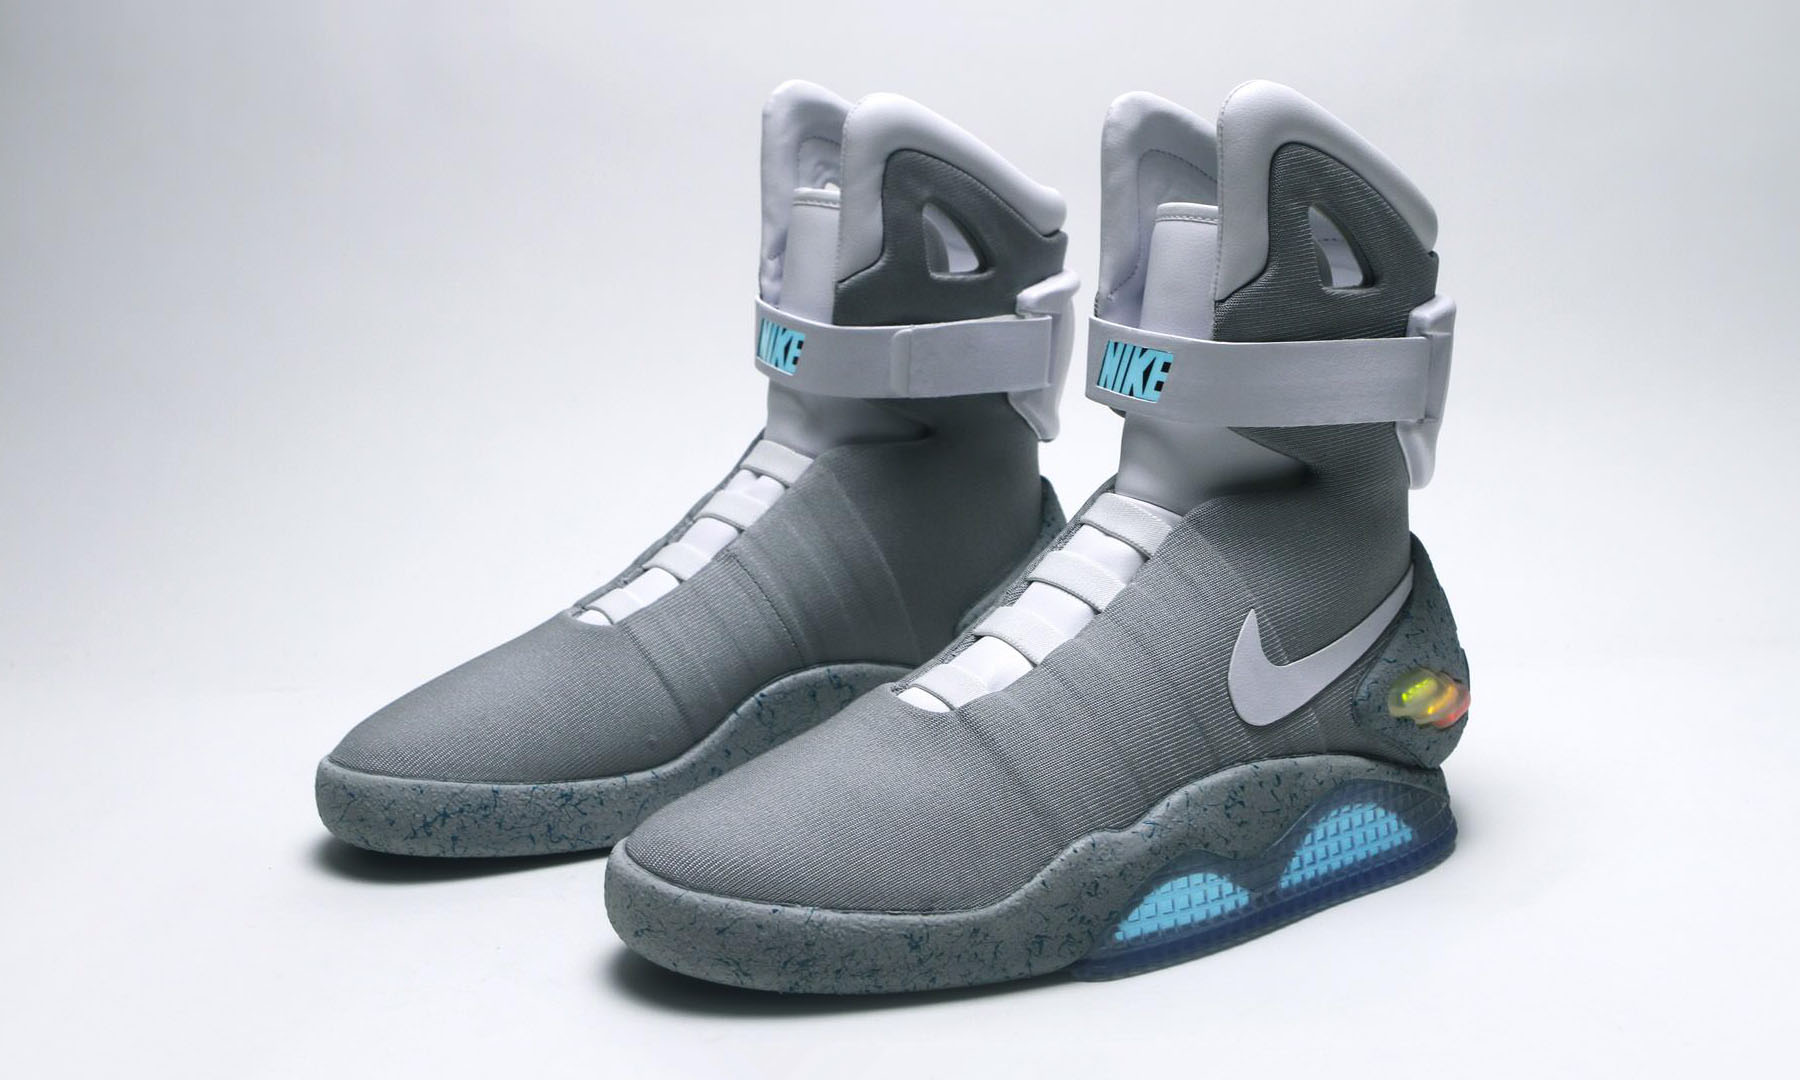 milagro Perjudicial bombilla Nike's Self-Lacing Sneakers From 'Back To The Future II' Are Real